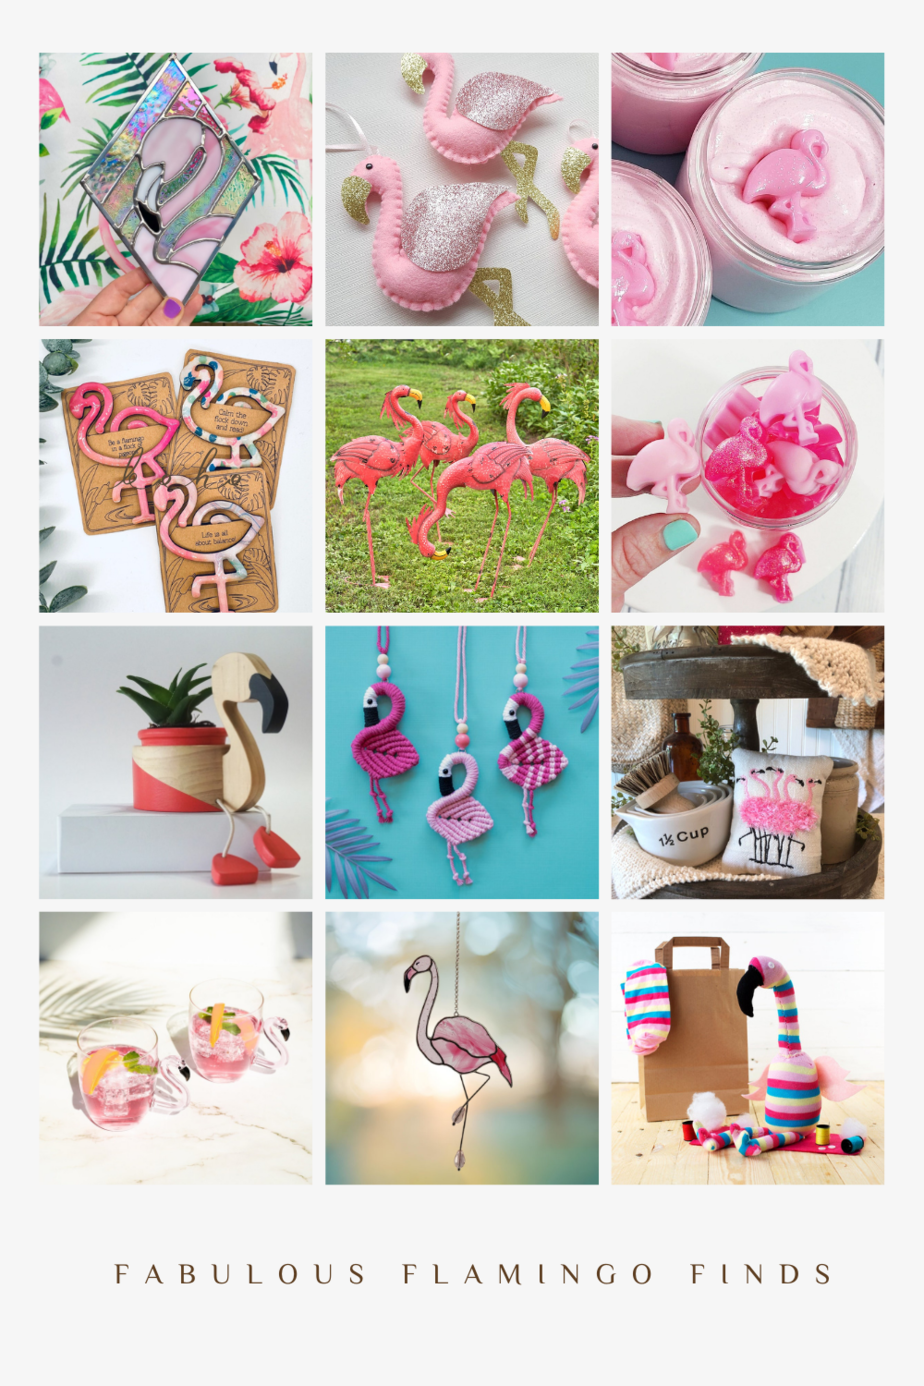 Fabulous Flamingo Finds - unique gift ideas for any occasion